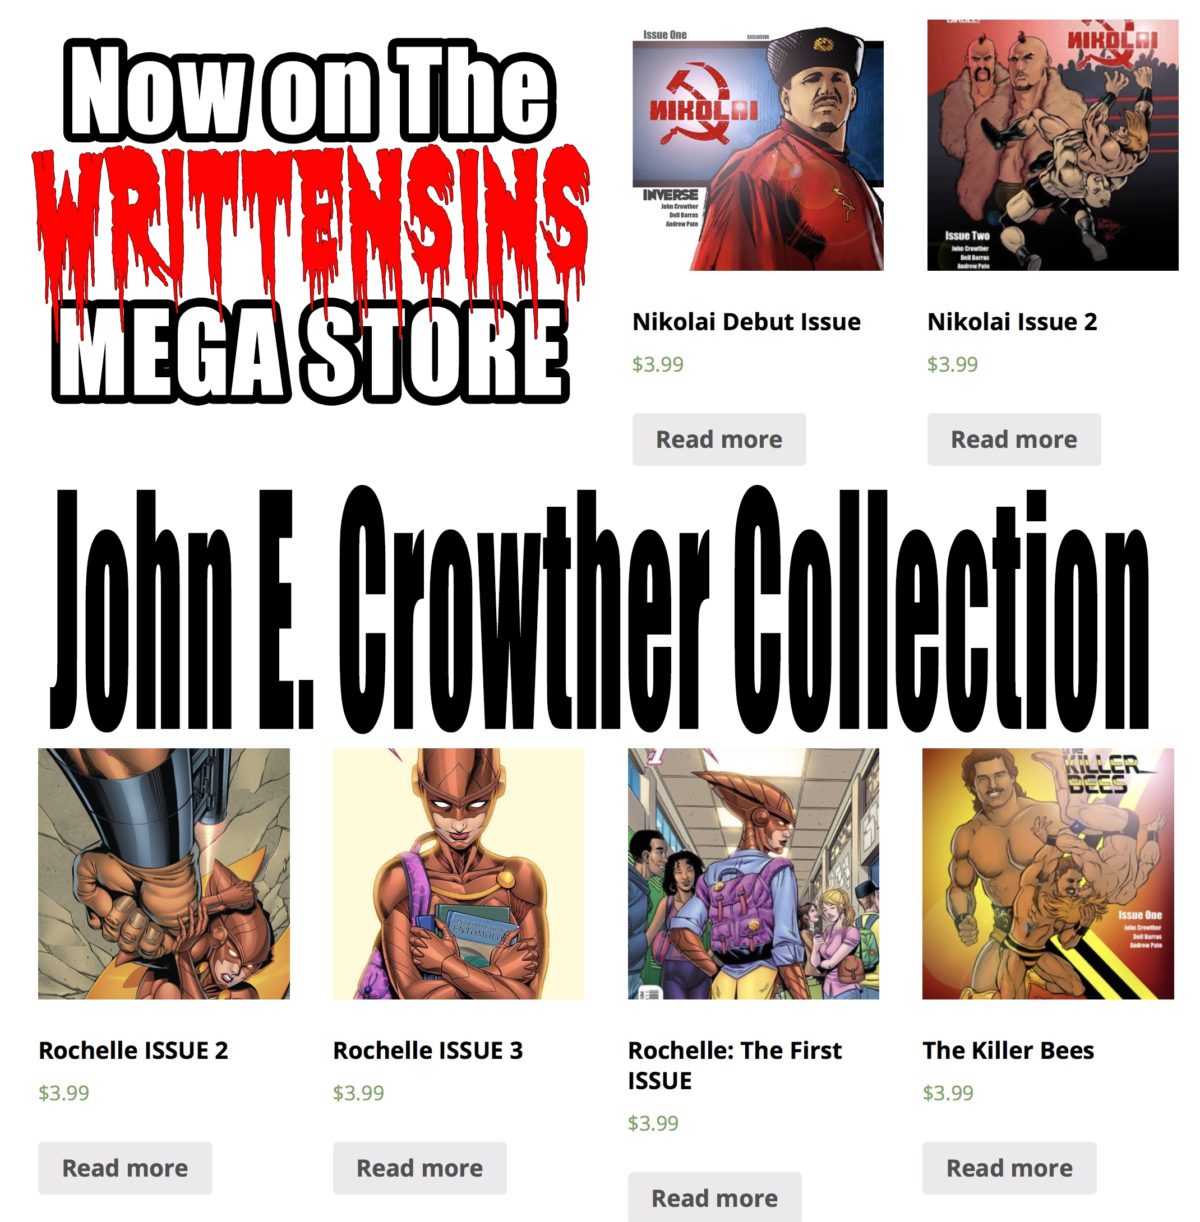 New Additions to The MEGA STORE:: The John E. Crowther Collection